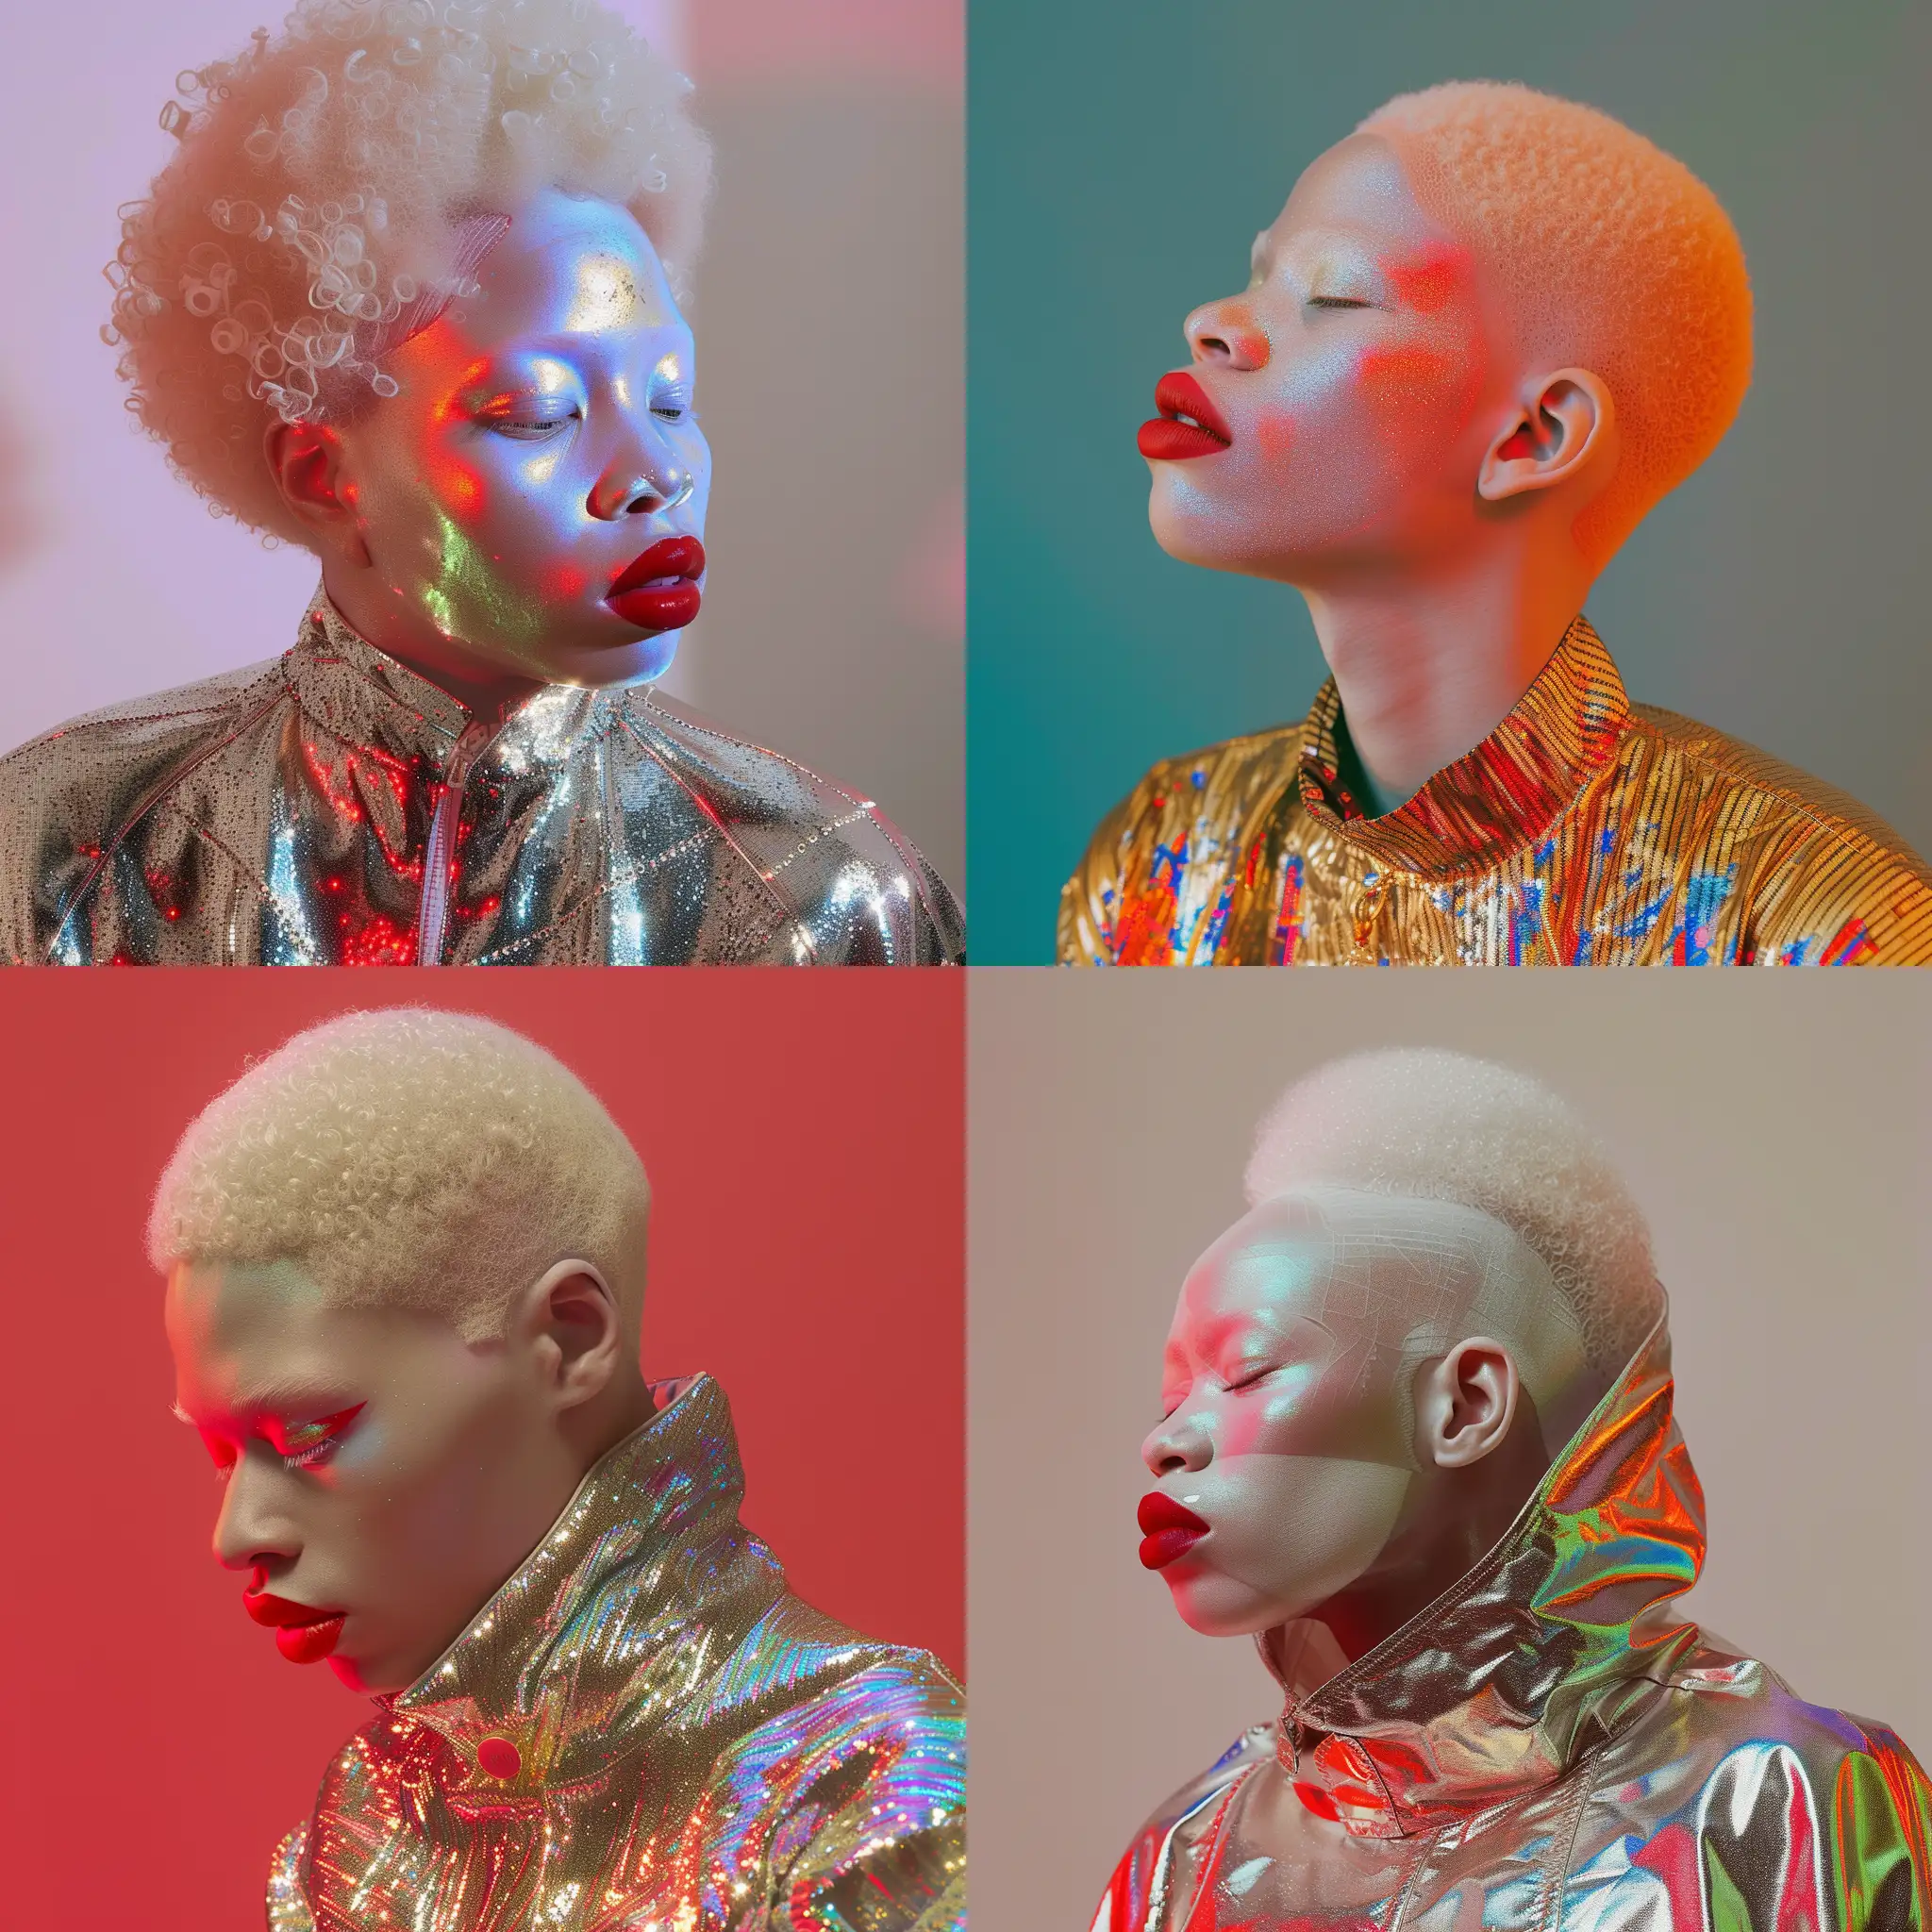 Albino-African-Woman-in-Holographic-Outfit-on-Kodak-Flat-Background-with-Realistic-Red-Lipstick